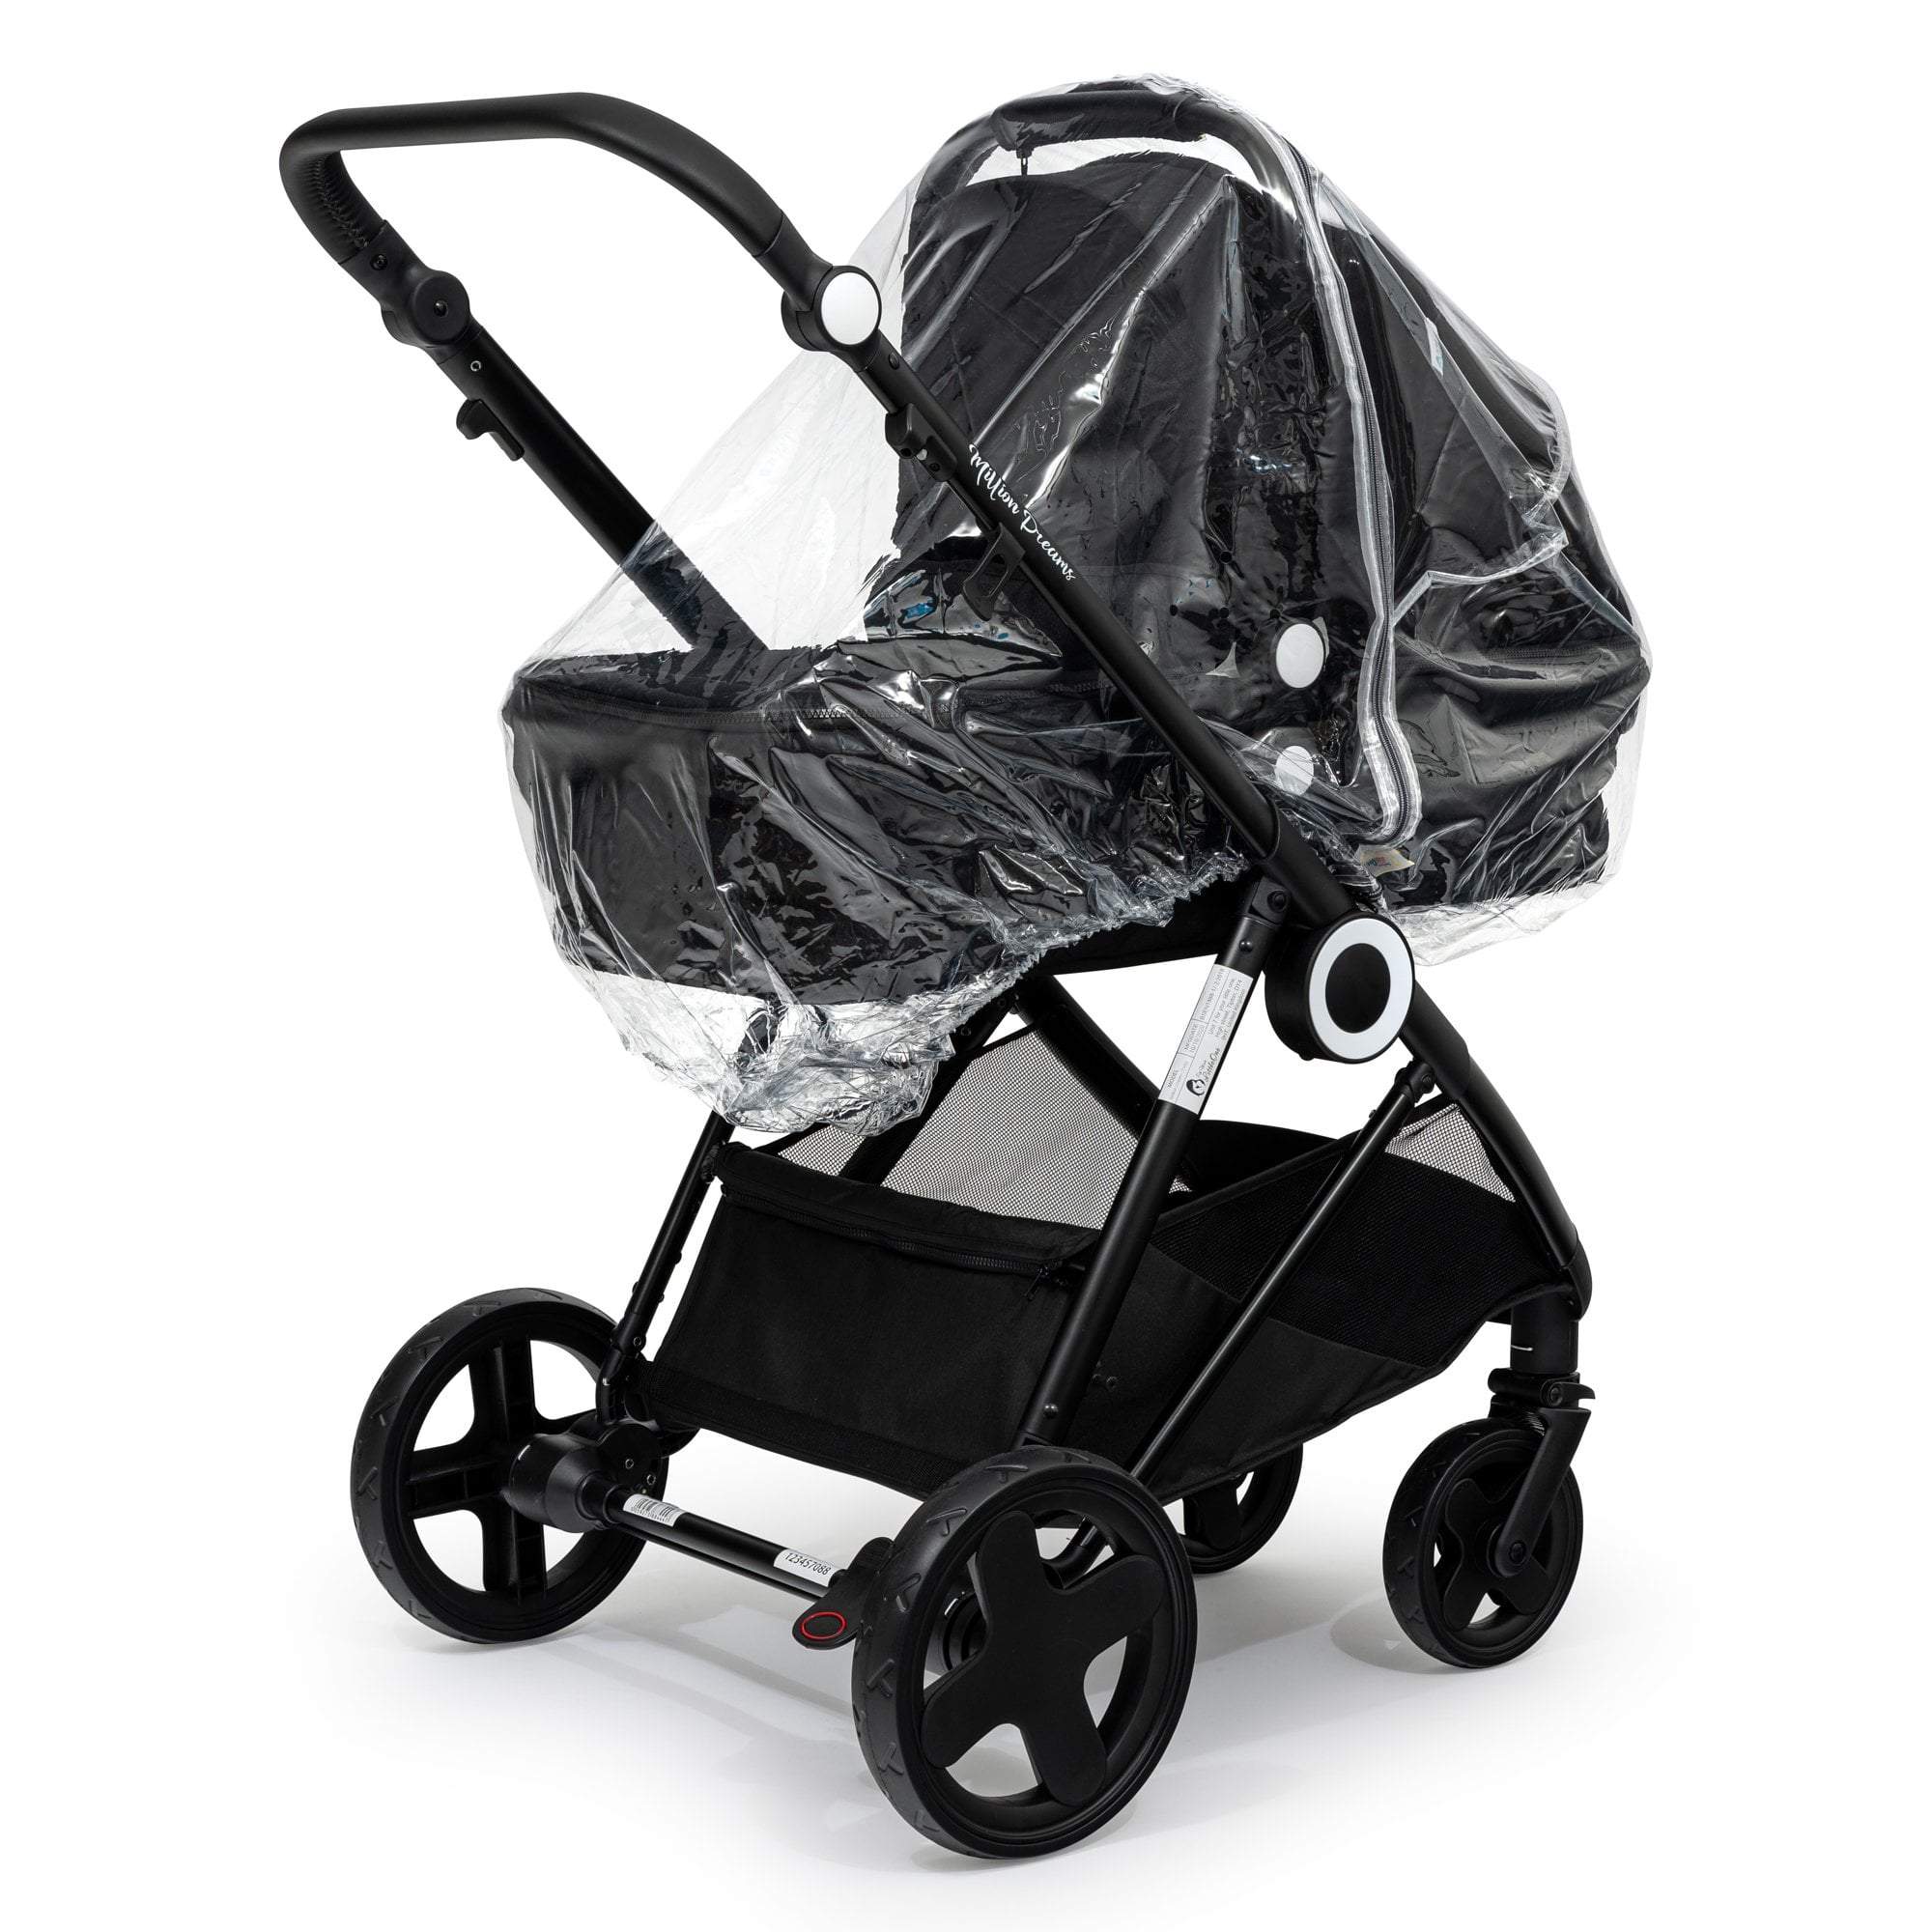 Carrycot Raincover Compatible With Mamas & Papas - Fits All Models - For Your Little One